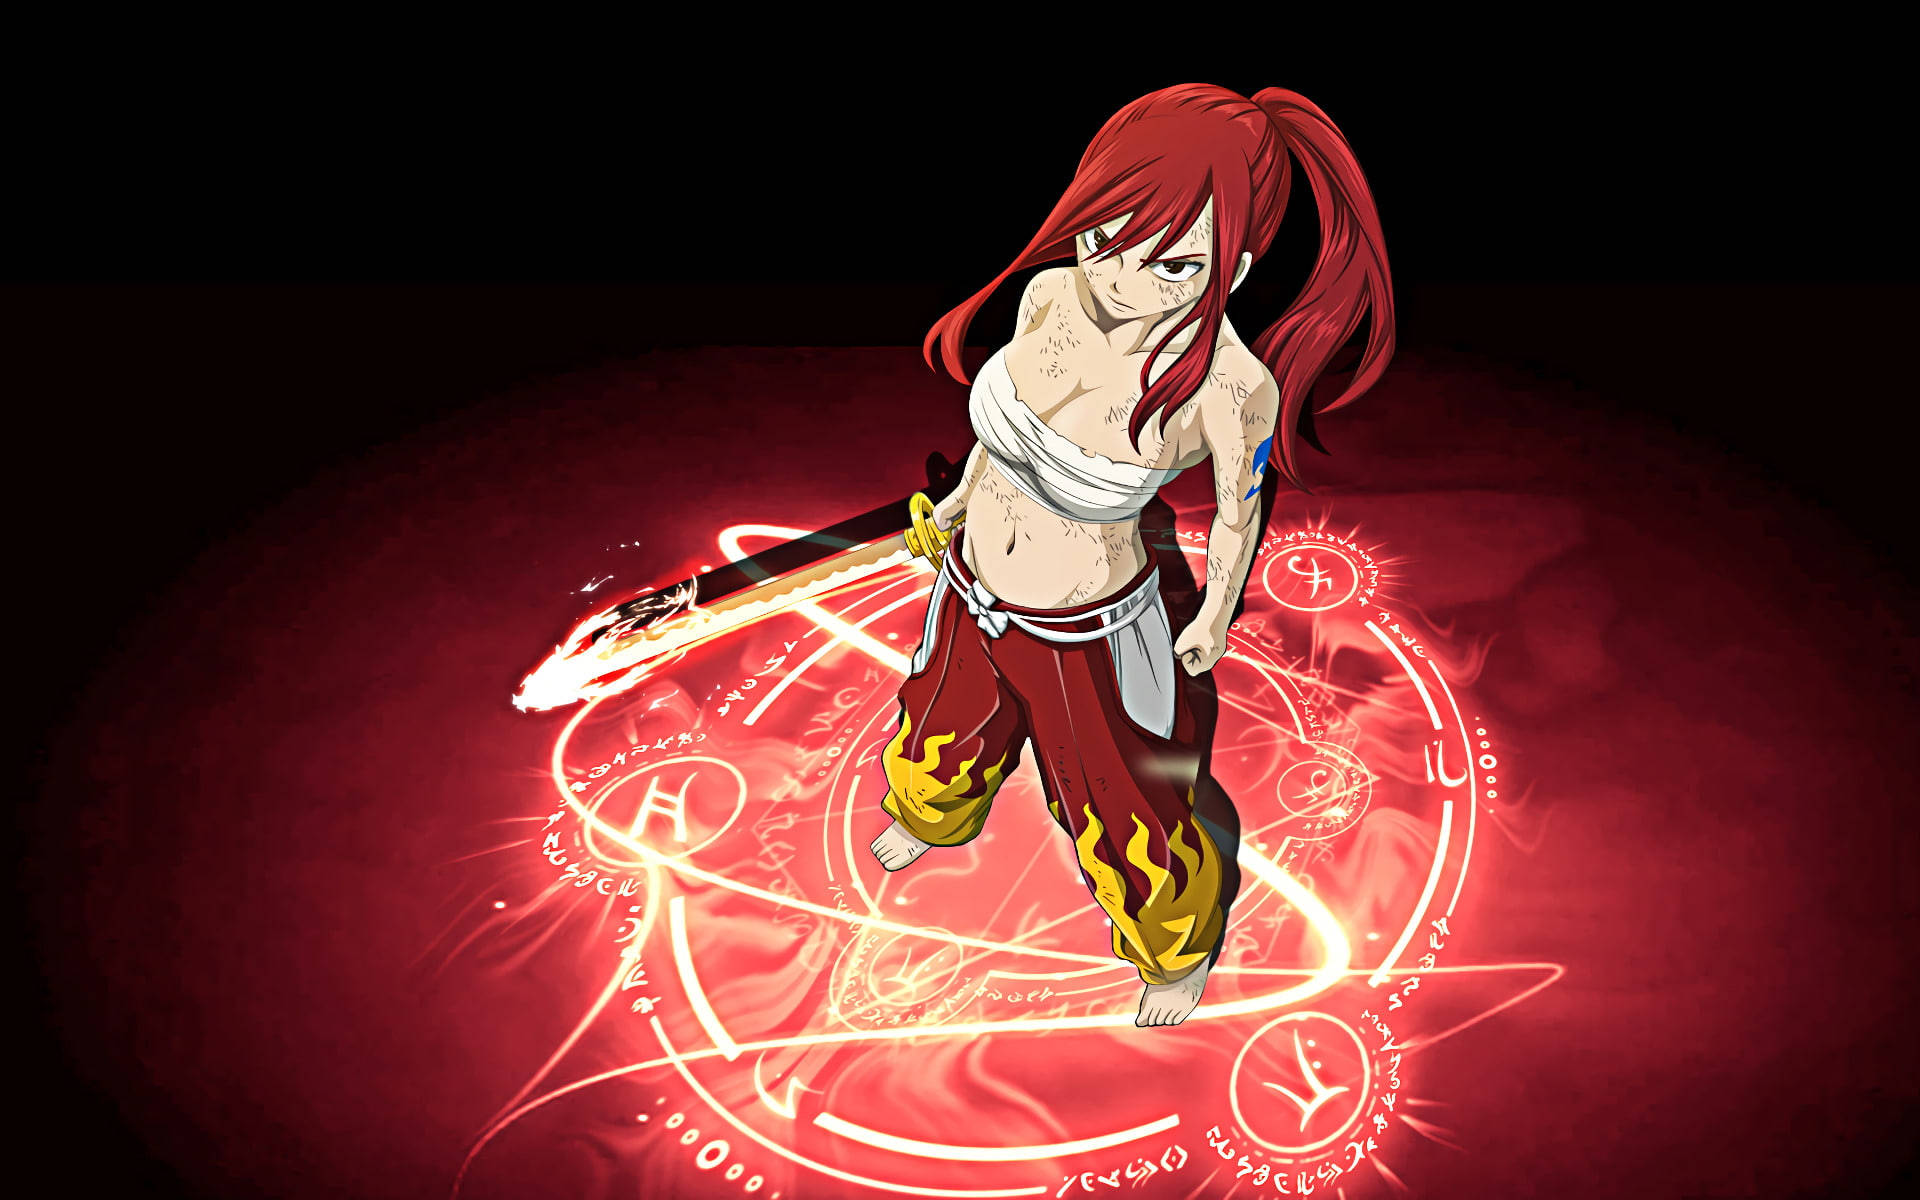 Caption: Fairy Tail's Fearless Warrior - Erza Scarlet